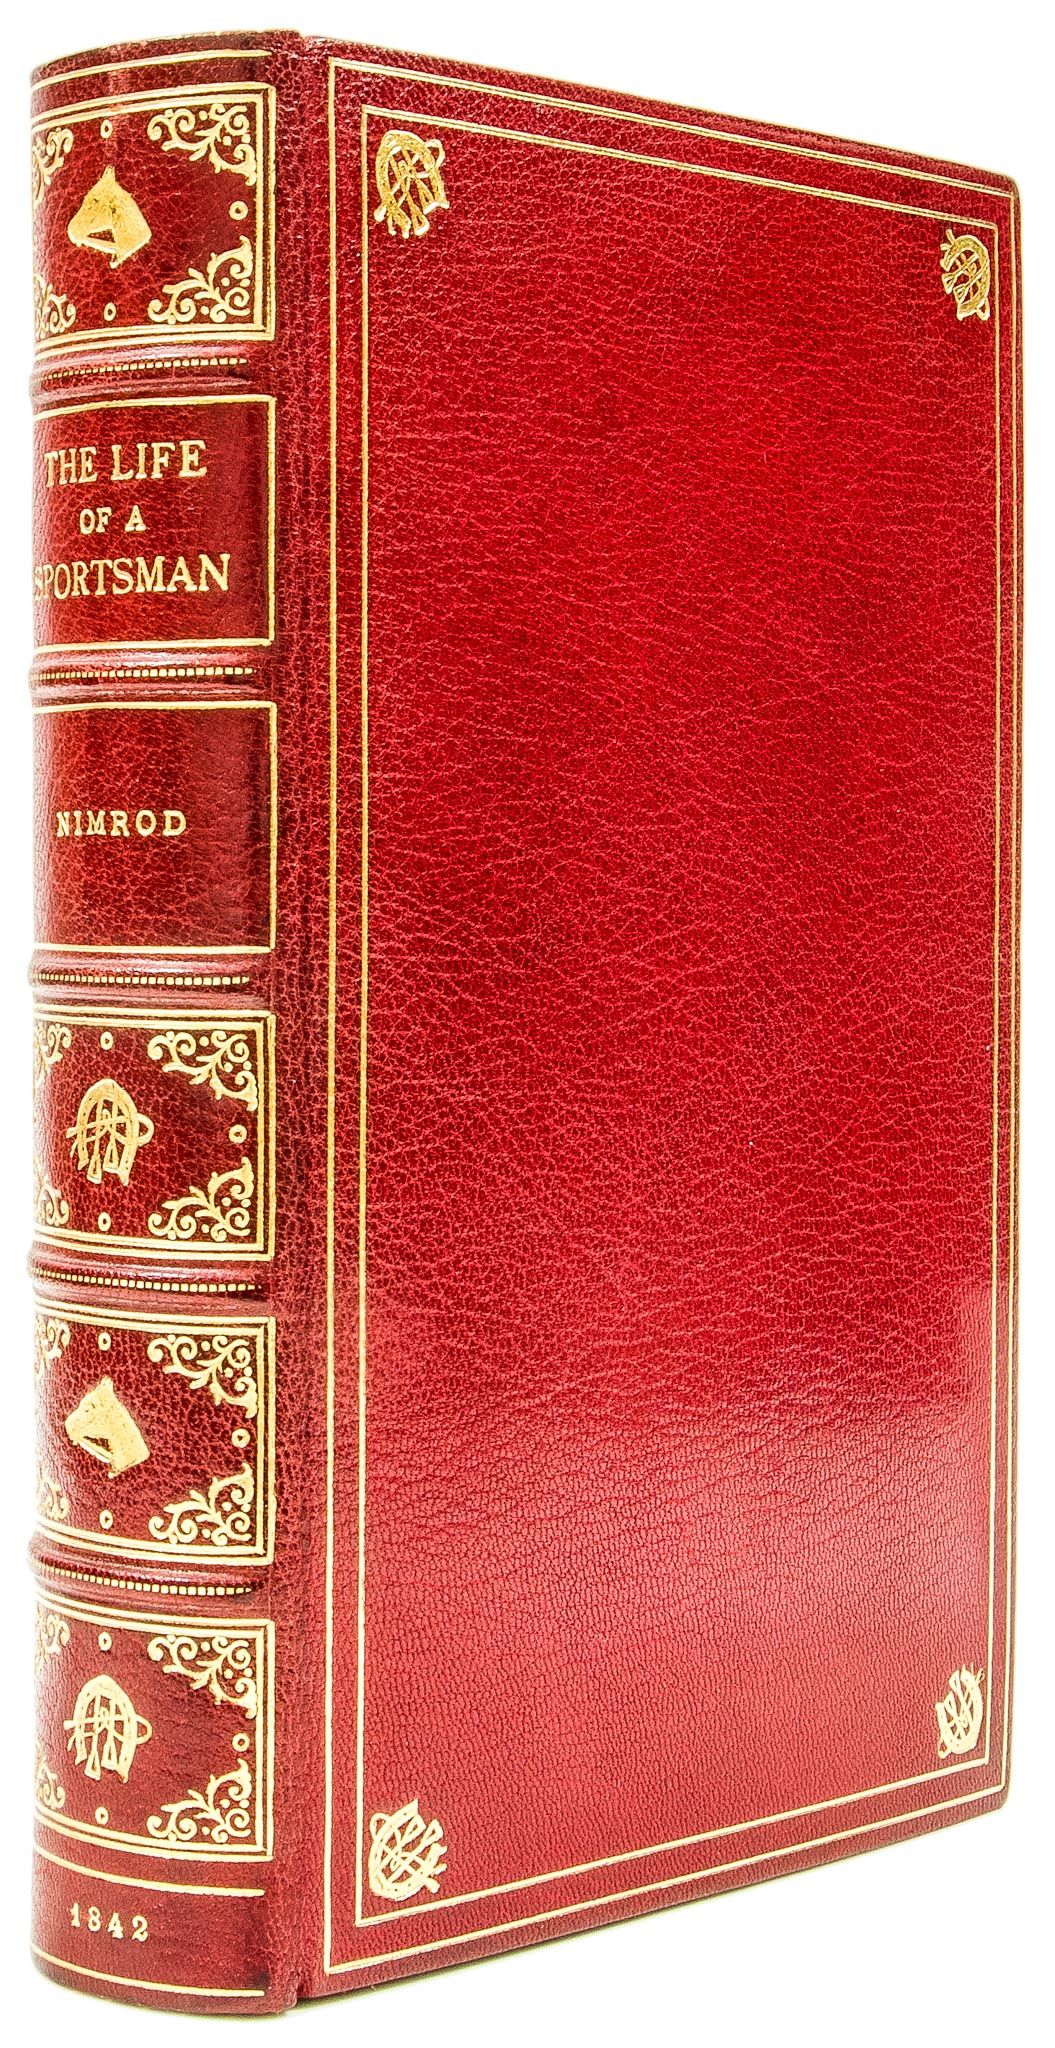 Alken (Henry).- [Apperley (Charles J.)], "Nimrod". - The Life of a Sportsman, first edition, first